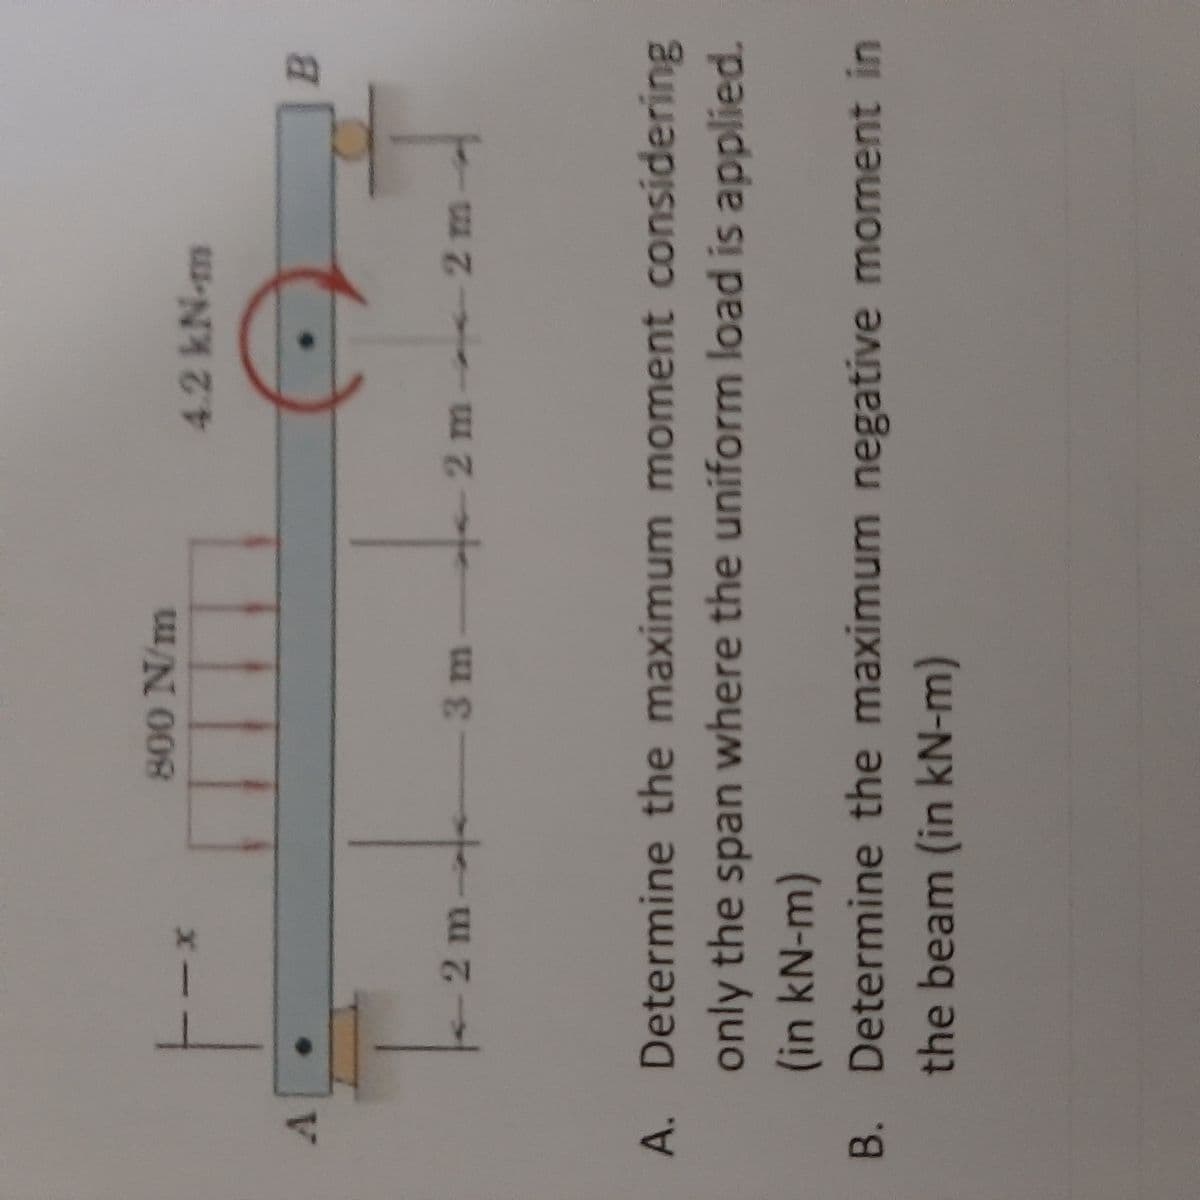 800 N/m
4.2kN-m
V.
B.
-2 m-
2m-
Cw 7
2m-
3m
A. Determine the maximum moment considering
only the span where the uniform load is applied.
(in kN-m)
B. Determine the maximum negative moment in
the beam (in kN-m)
